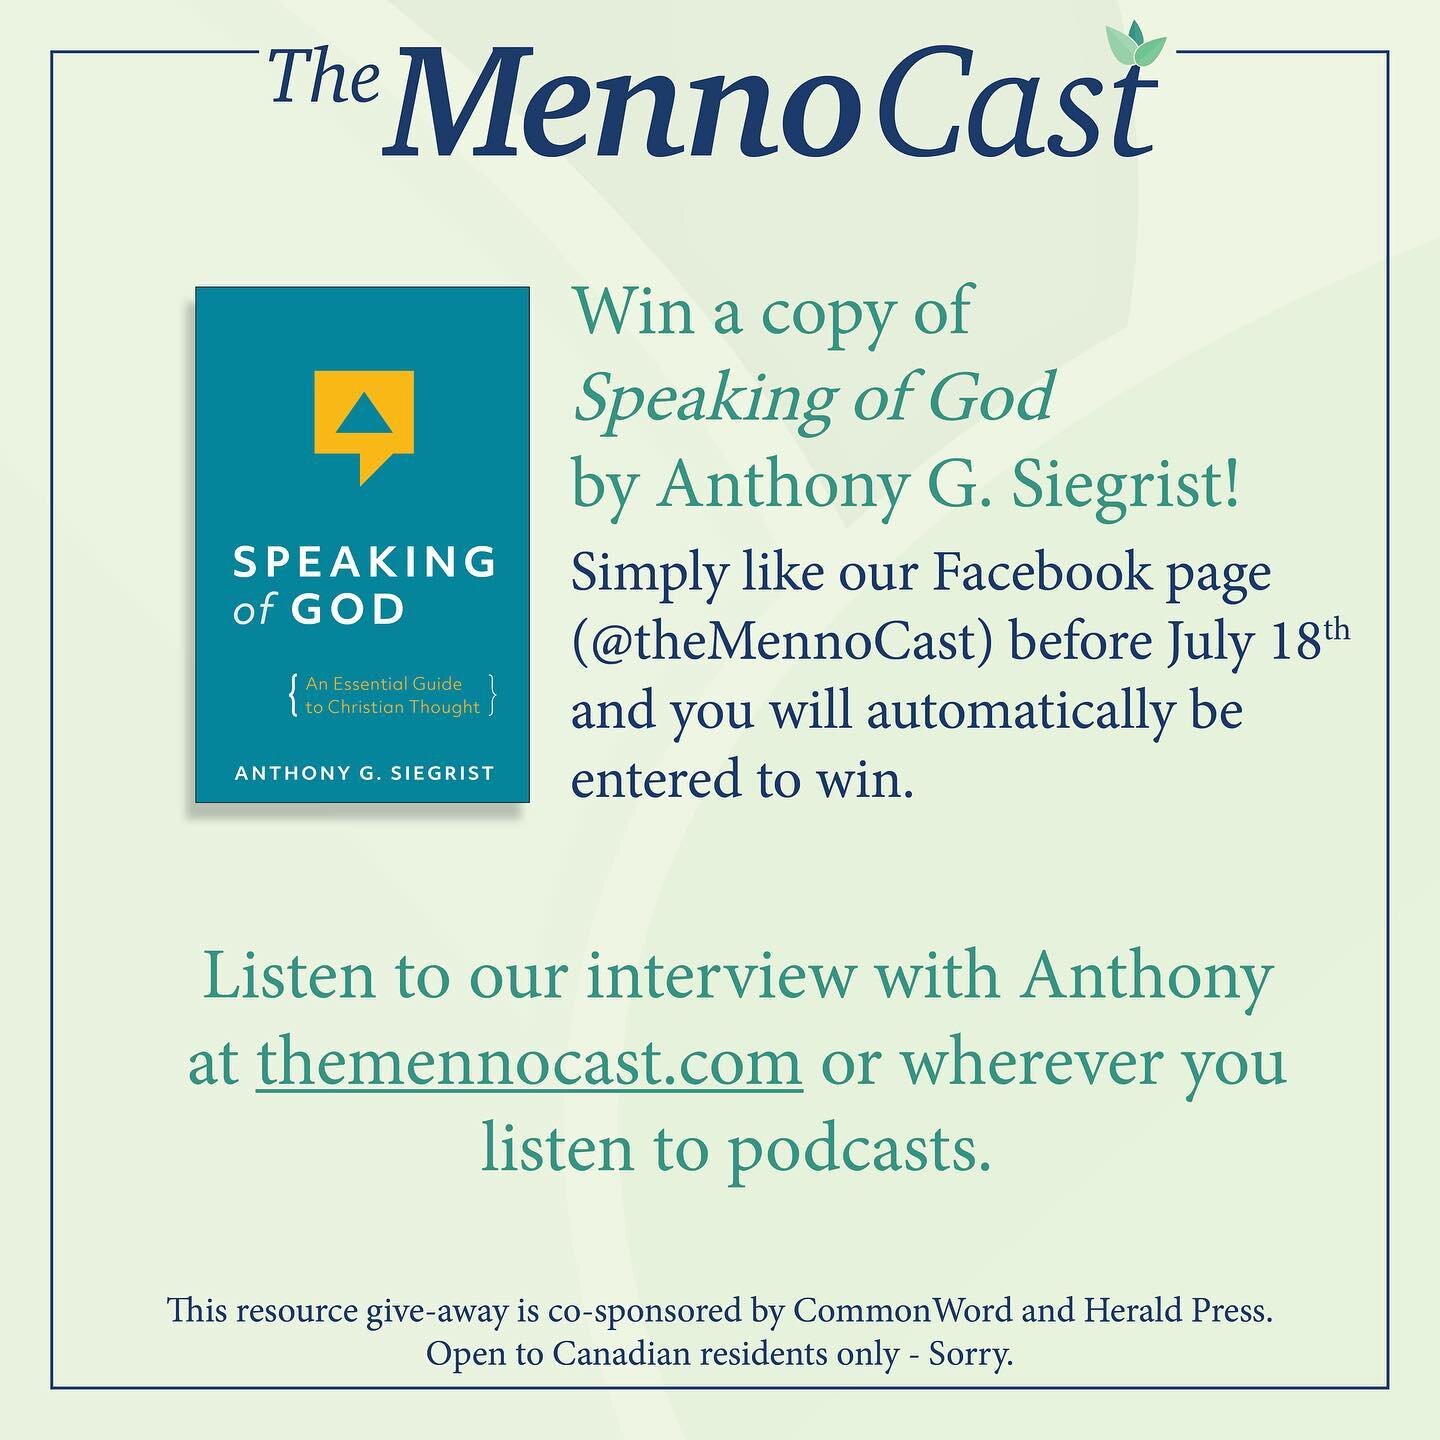 In Episode 2 of our pilot season we chatted with Anthony G. Siegrist. And now you can win his book! Just like our Facebook page and you&rsquo;ll automatically be entered to win. Thanks for listening!